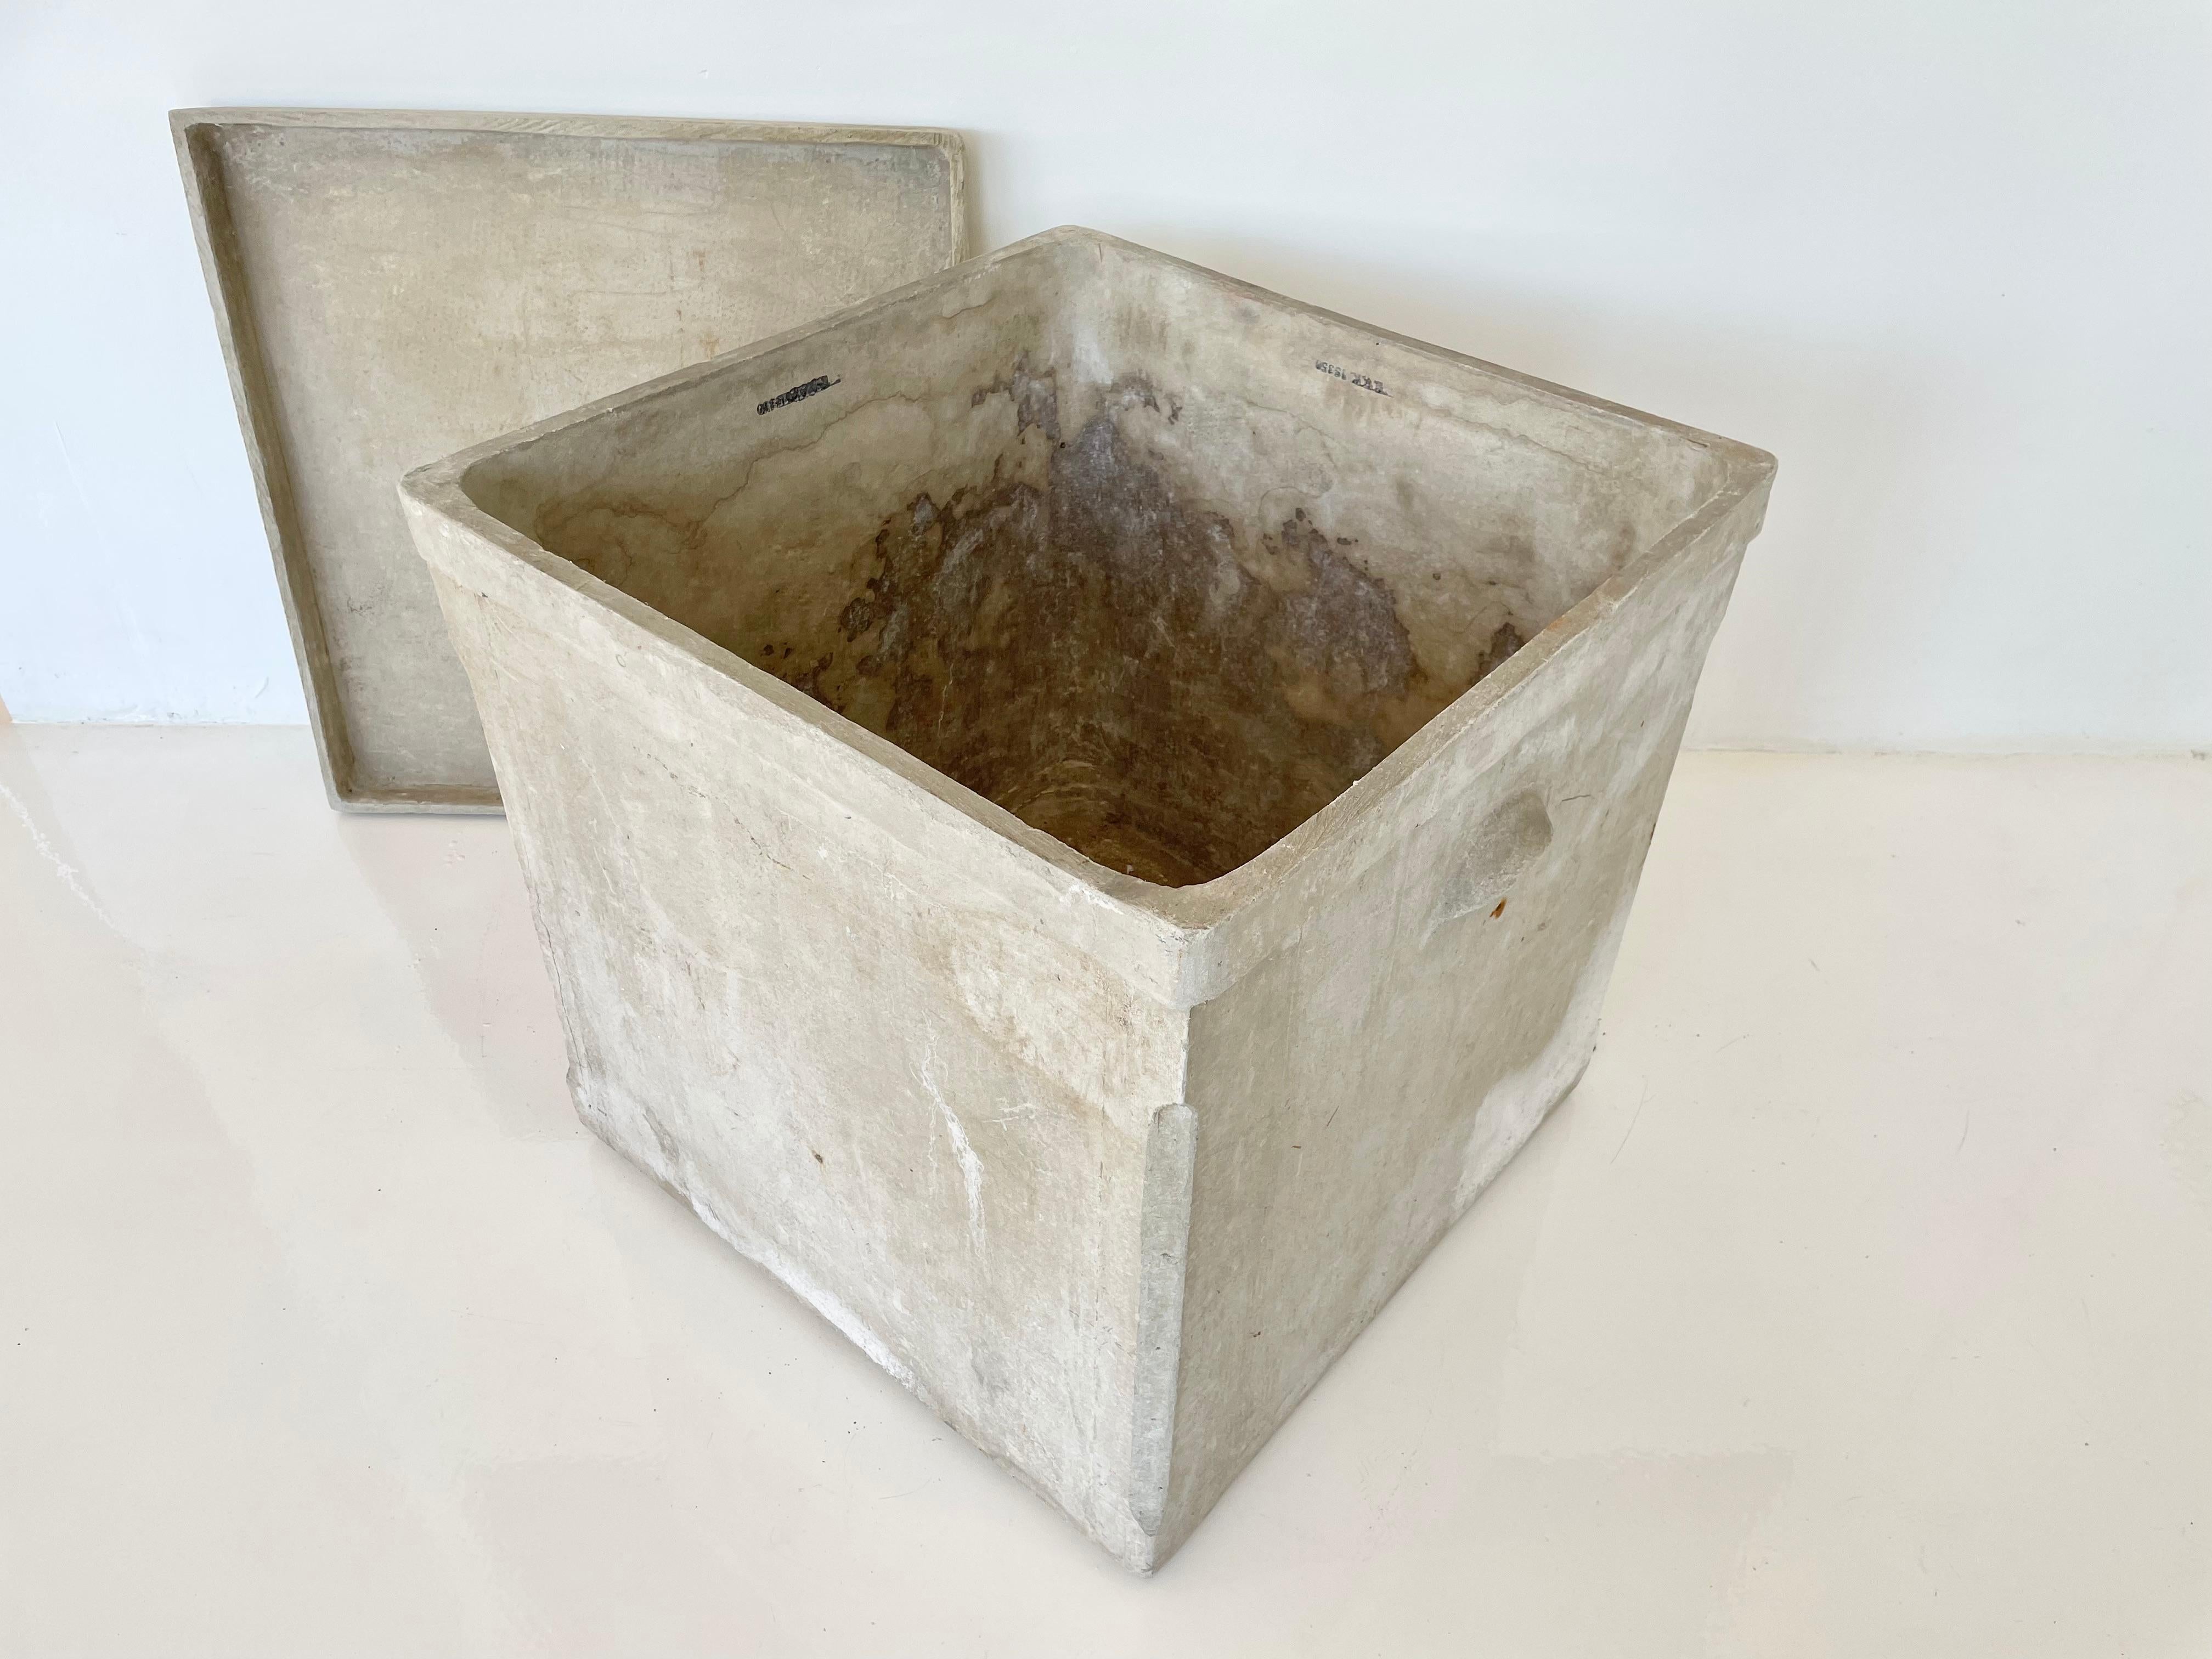 Sculptural concrete crate by Willy Guhl. Handmade in Switzerland, in the 1960s. Rounded rectangular frame with indented ridge. With matching removable lid/cover. Great for outside storage. Very good condition. Great patina.